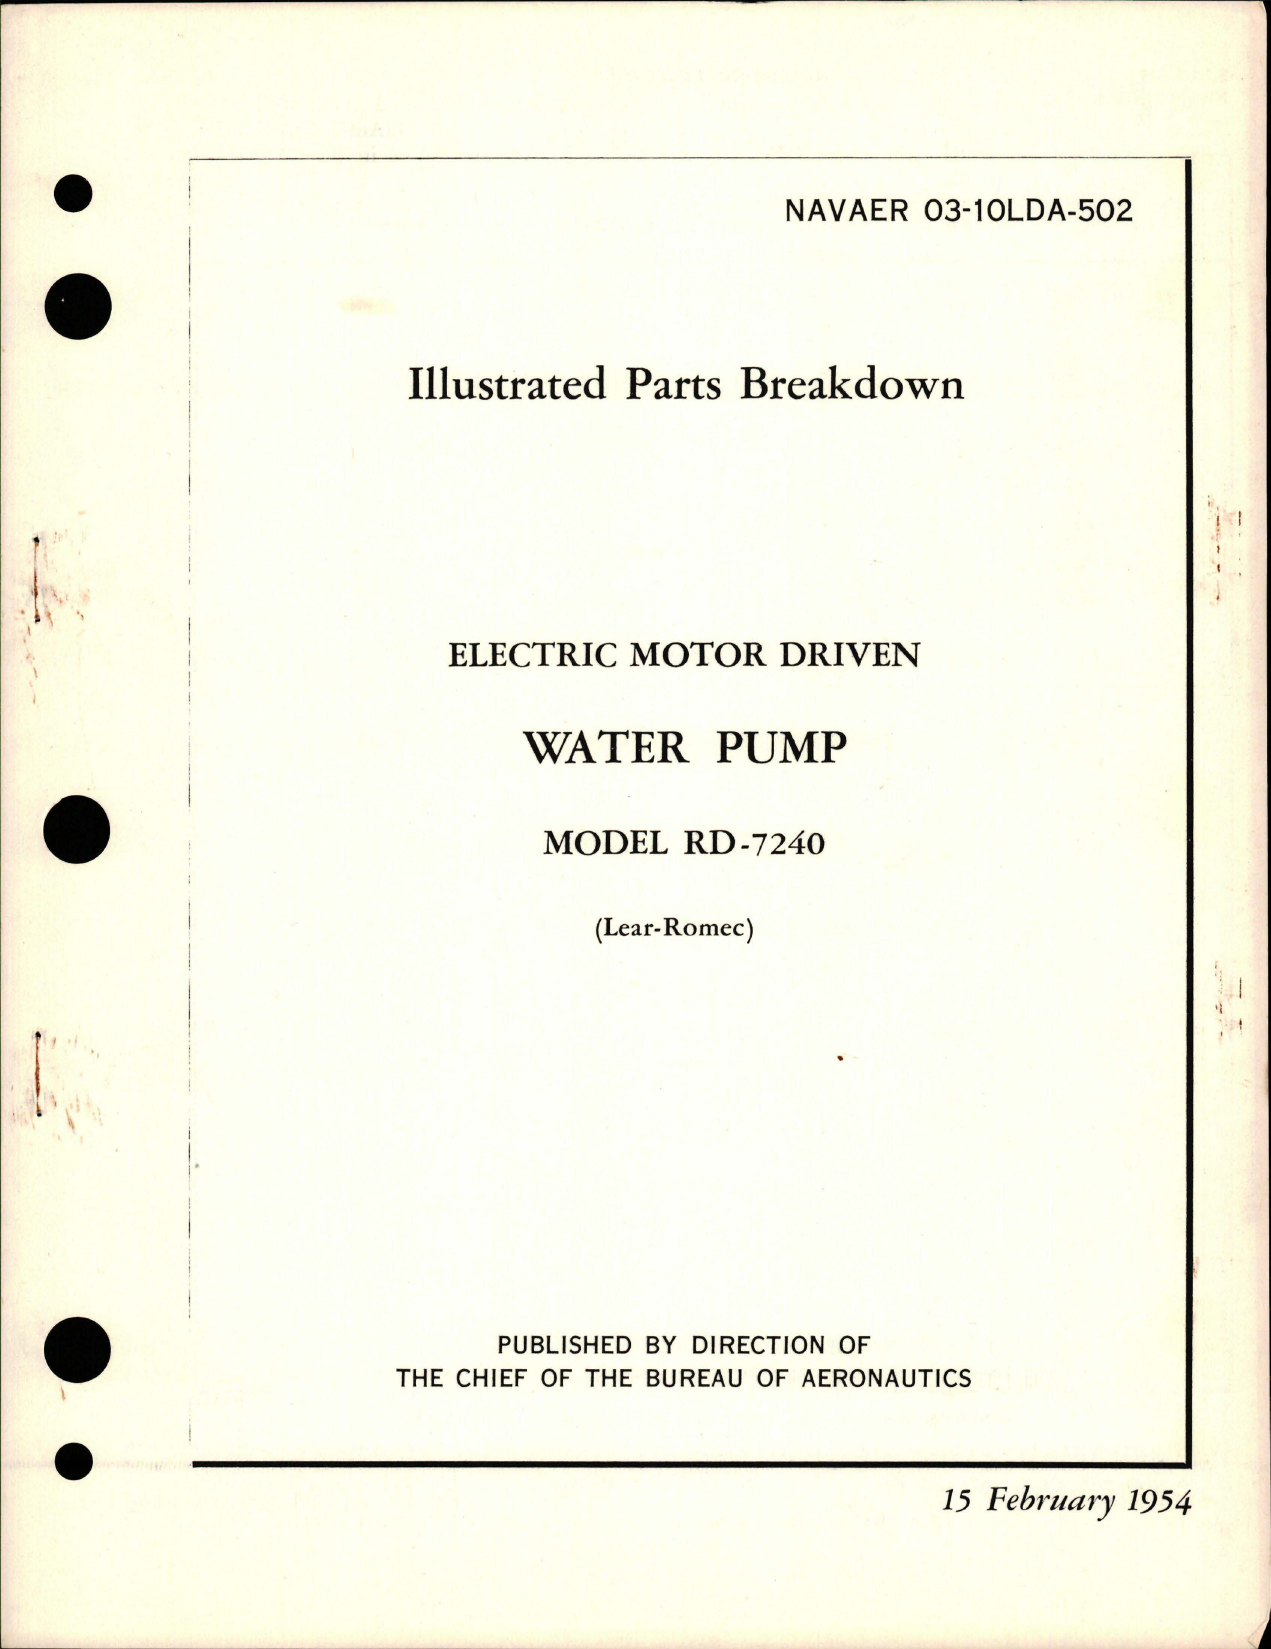 Sample page 1 from AirCorps Library document: Illustrated Parts Breakdown for Electric Motor Driven Water Pump - Model RD-7240